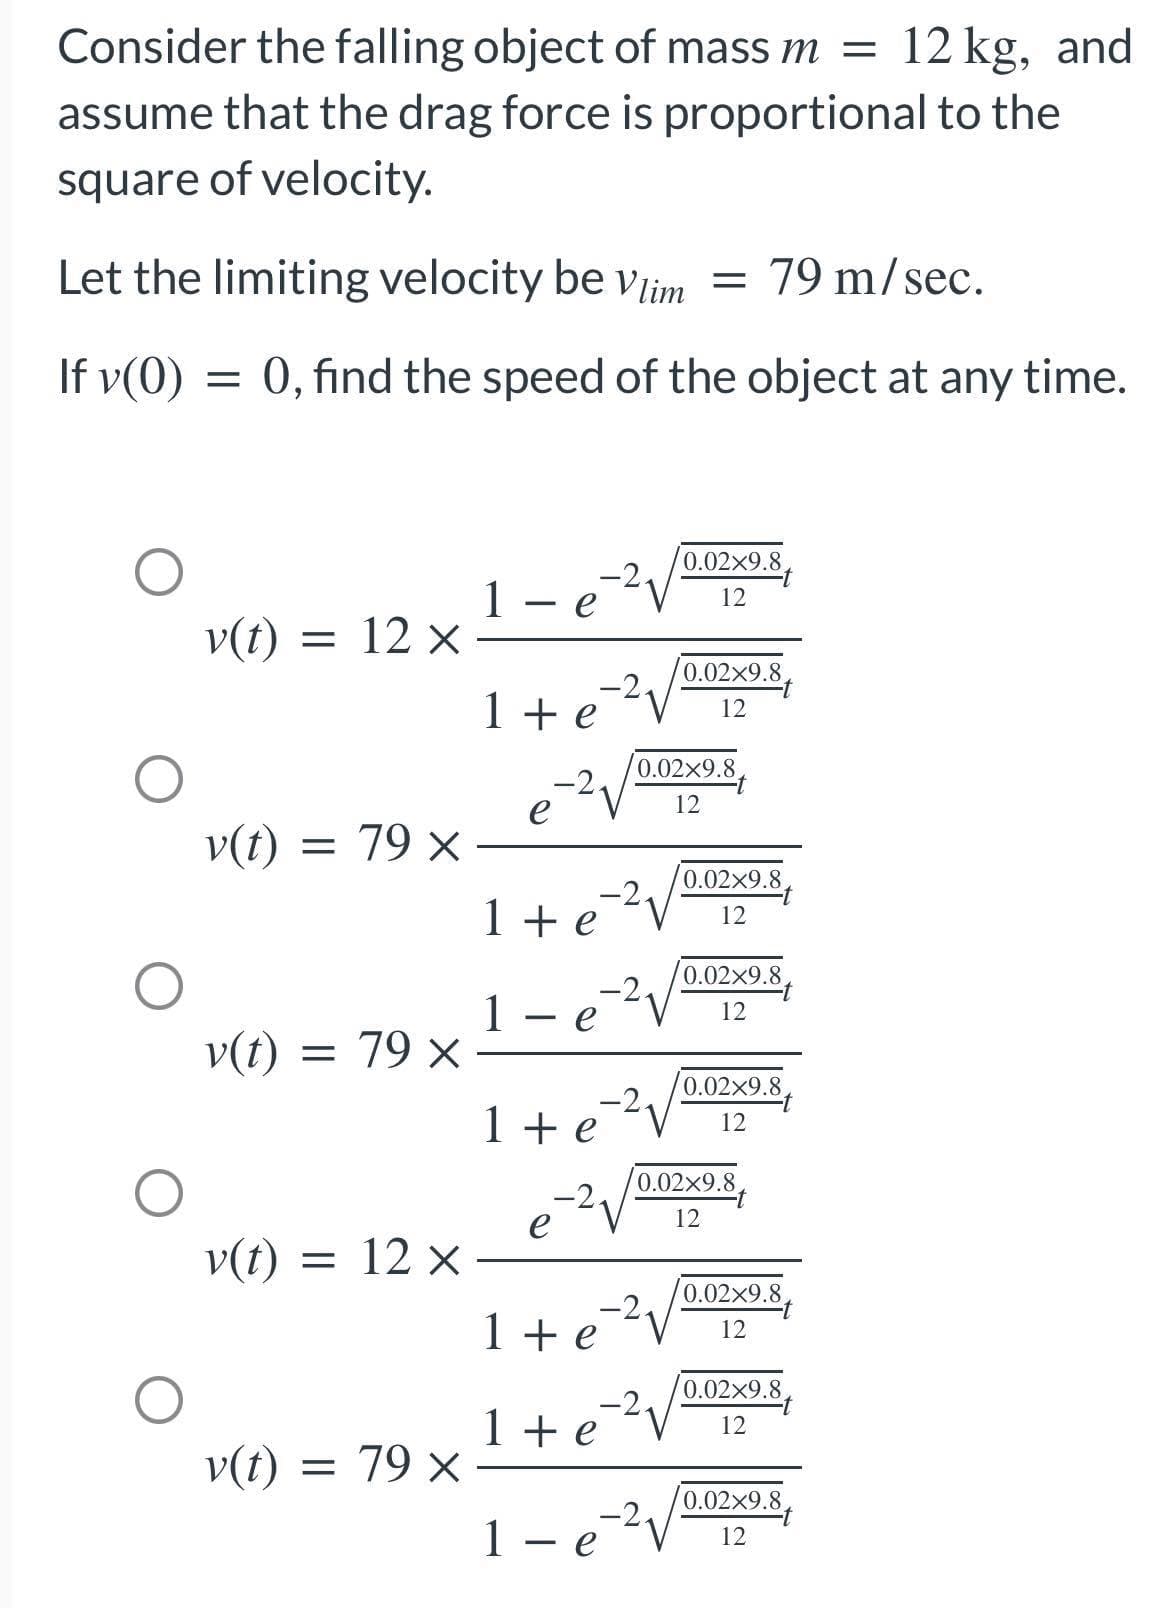 Consider the falling object of mass m = 12 kg, and
assume that the drag force is proportional to the
square of velocity.
Let the limiting velocity be vlim = 79 m/sec.
If v(0)
=
0, find the speed of the object at any time.
1
0.02x9.8.
12
e
v(t) = 12 x
0.02x9.8
1+e
12
e
v(t) = 79 x
1+e=²²√
е
-2.
1- e
v(t) = 79 x
1+e
e
v(t) = 12 x
1 + e
1 + e
v(t) = 79 x
1 - e ² V
0.02×9.8
12
0.02x9.8
12
0.02x9.8
12
0.02x9.8.
12
0.02x9.8
12
0.02×9.8
12
0.02×9.8
12
0.02x9.8
12